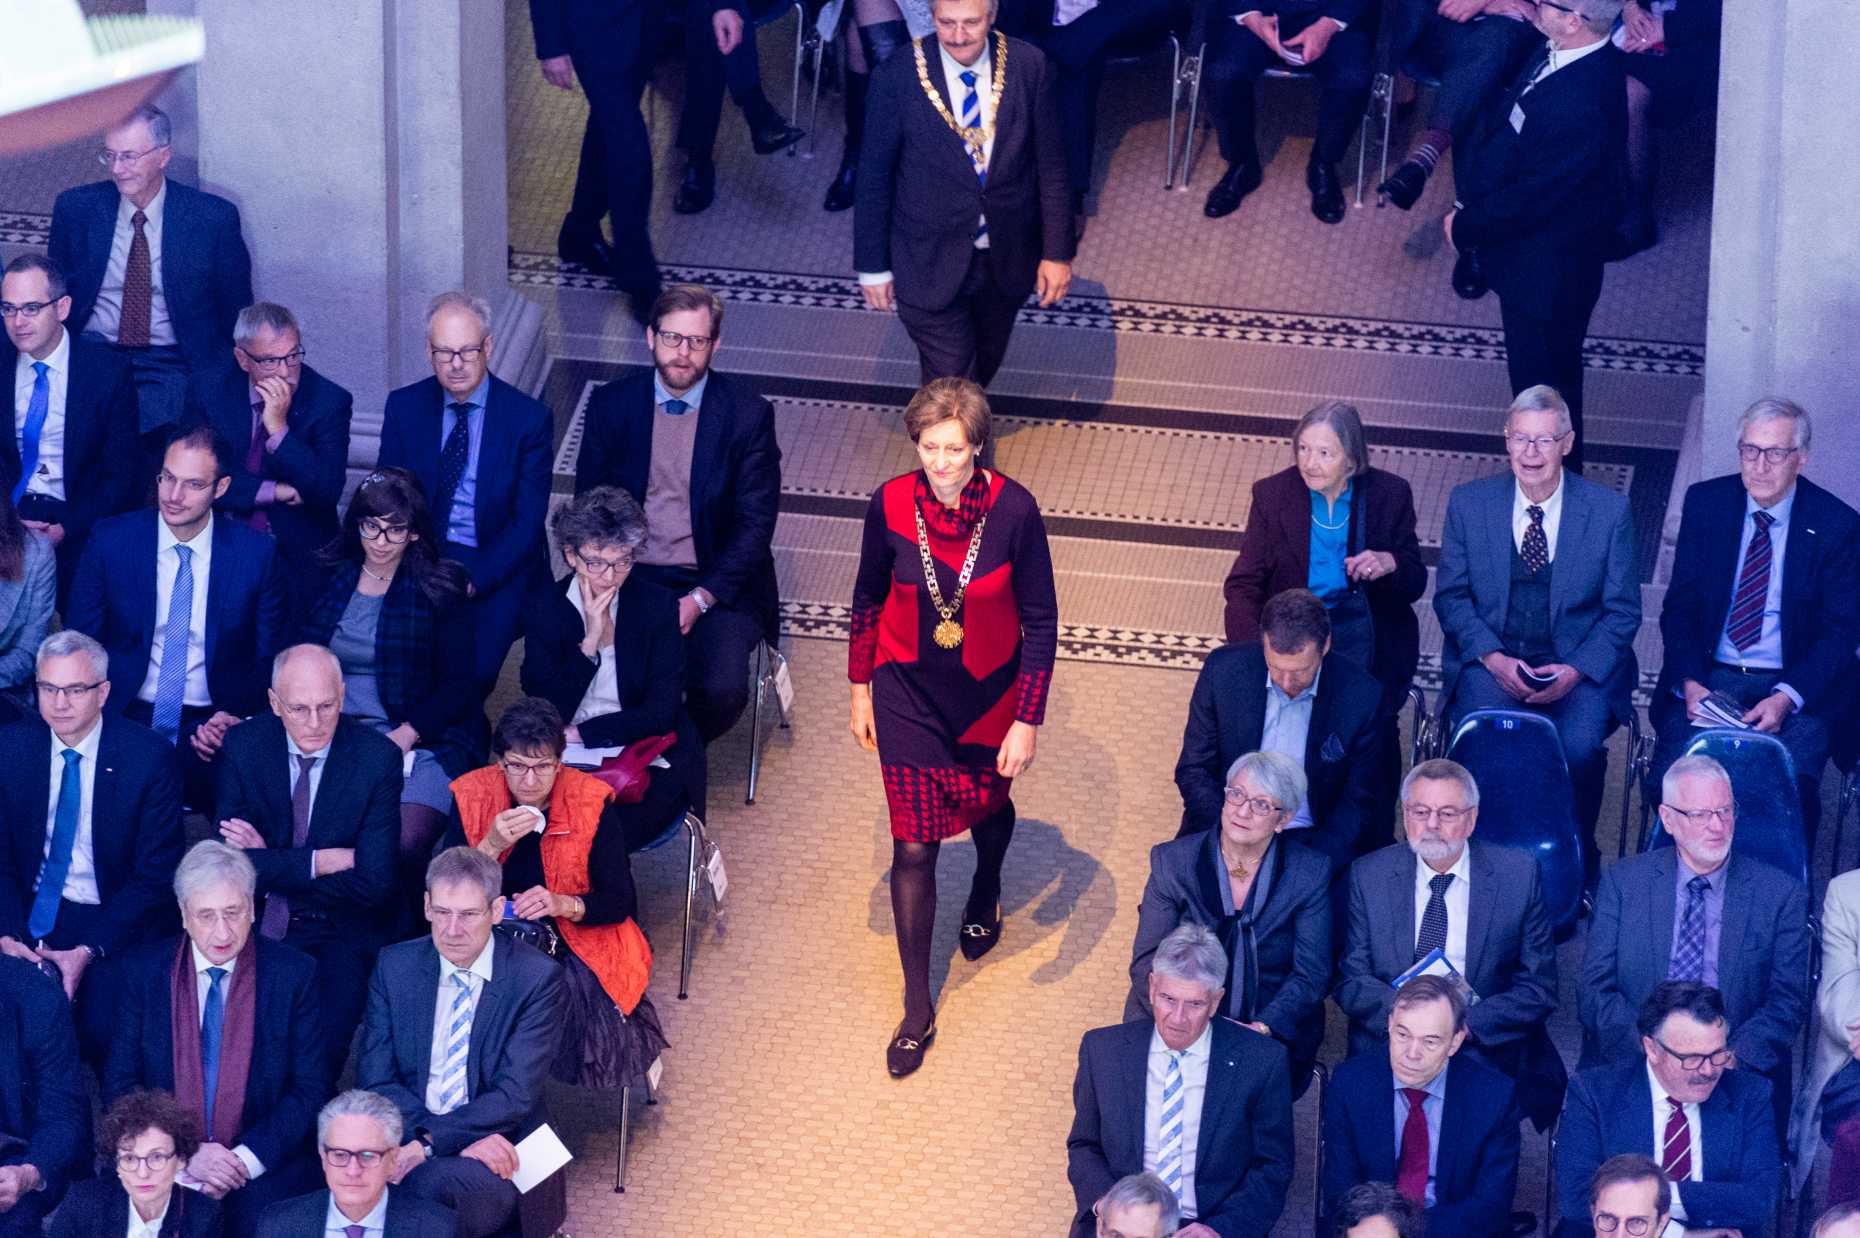 Enlarged view: ETH Rector Sarah Springman during the opening ceremony of ETH Day 2018. (Image: ETH Zurich / Oliver Bartenschlager)